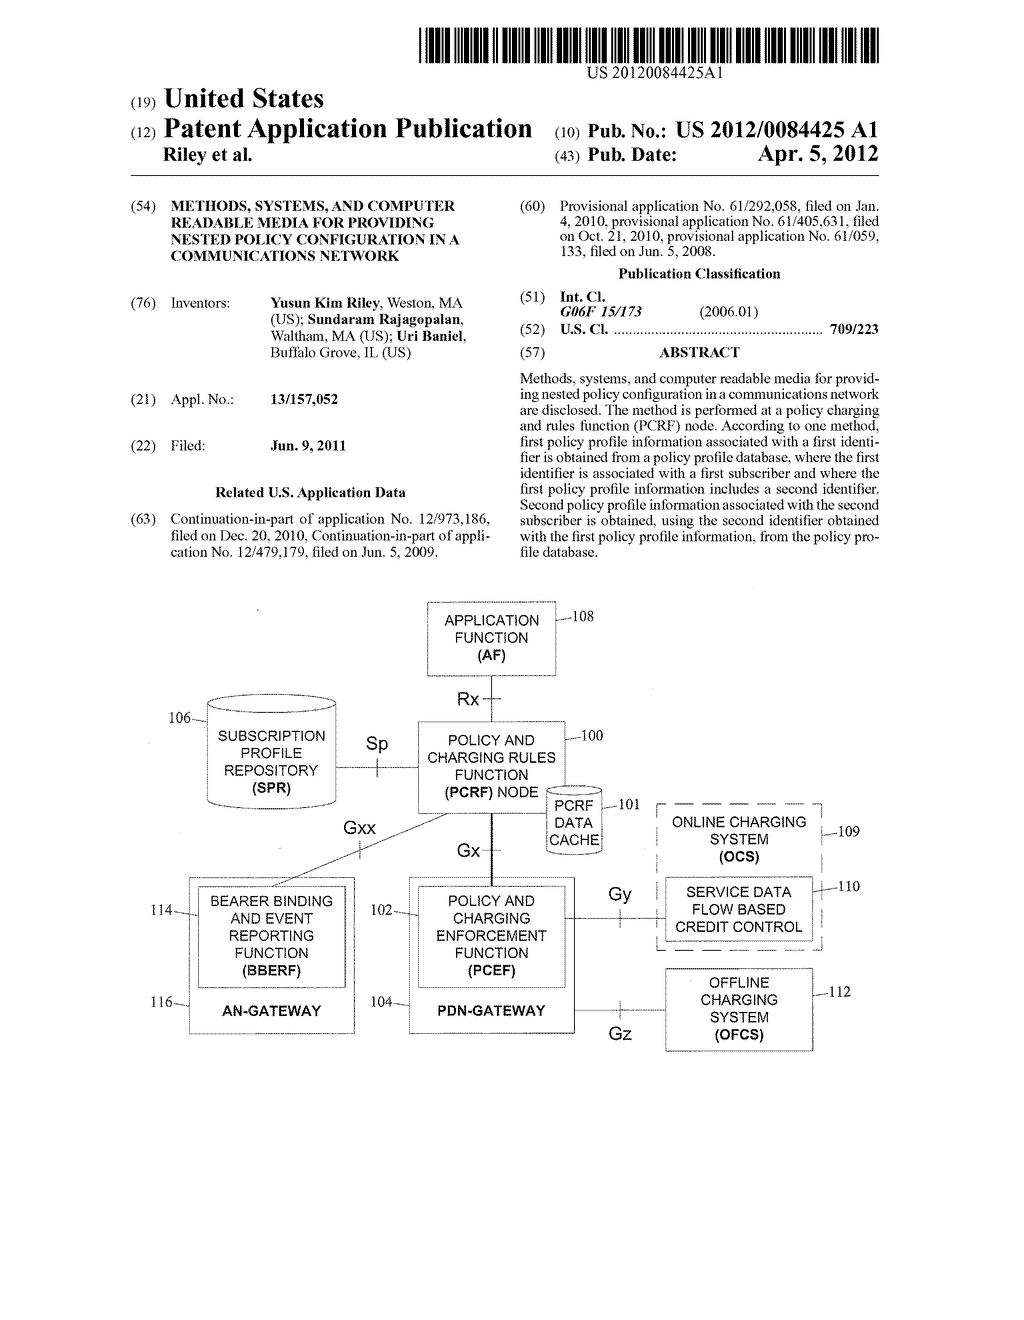 METHODS, SYSTEMS, AND COMPUTER READABLE MEDIA FOR PROVIDING NESTED POLICY     CONFIGURATION IN A COMMUNICATIONS NETWORK - diagram, schematic, and image 01